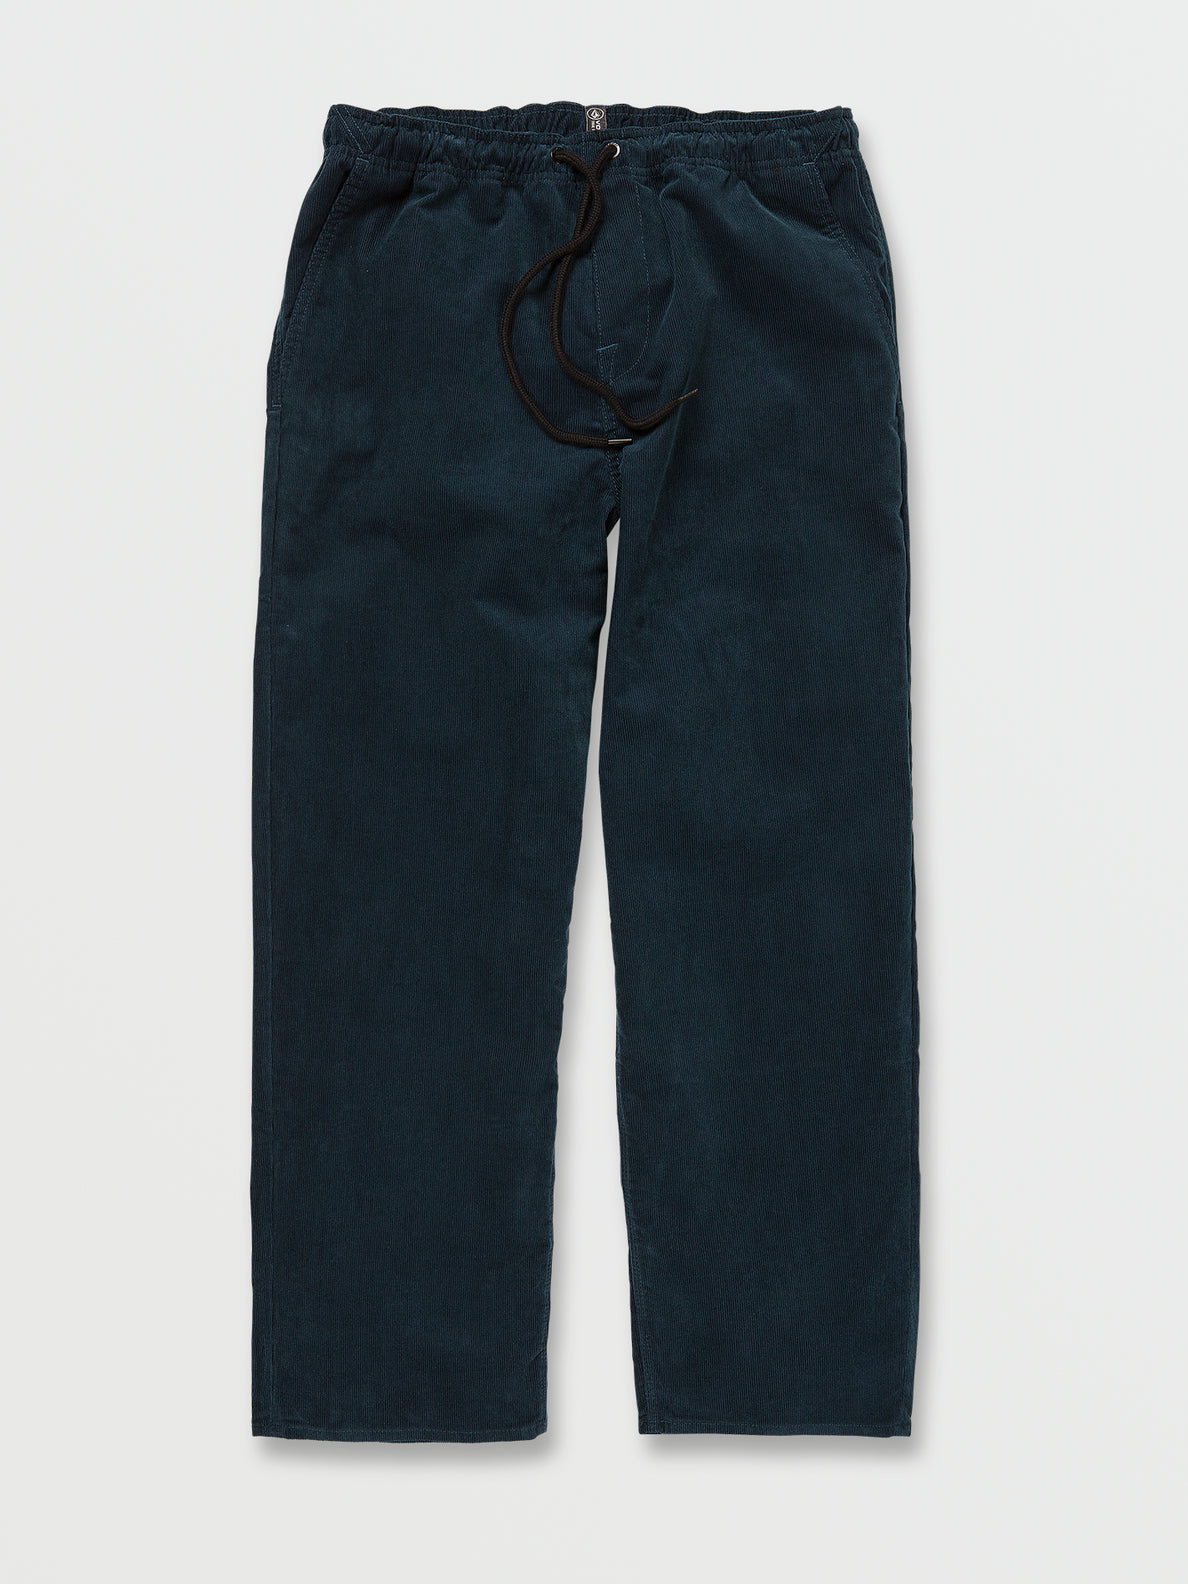 Outer Spaced Casual Pants - Cruzer Blue (A1212306_CZB) [F]